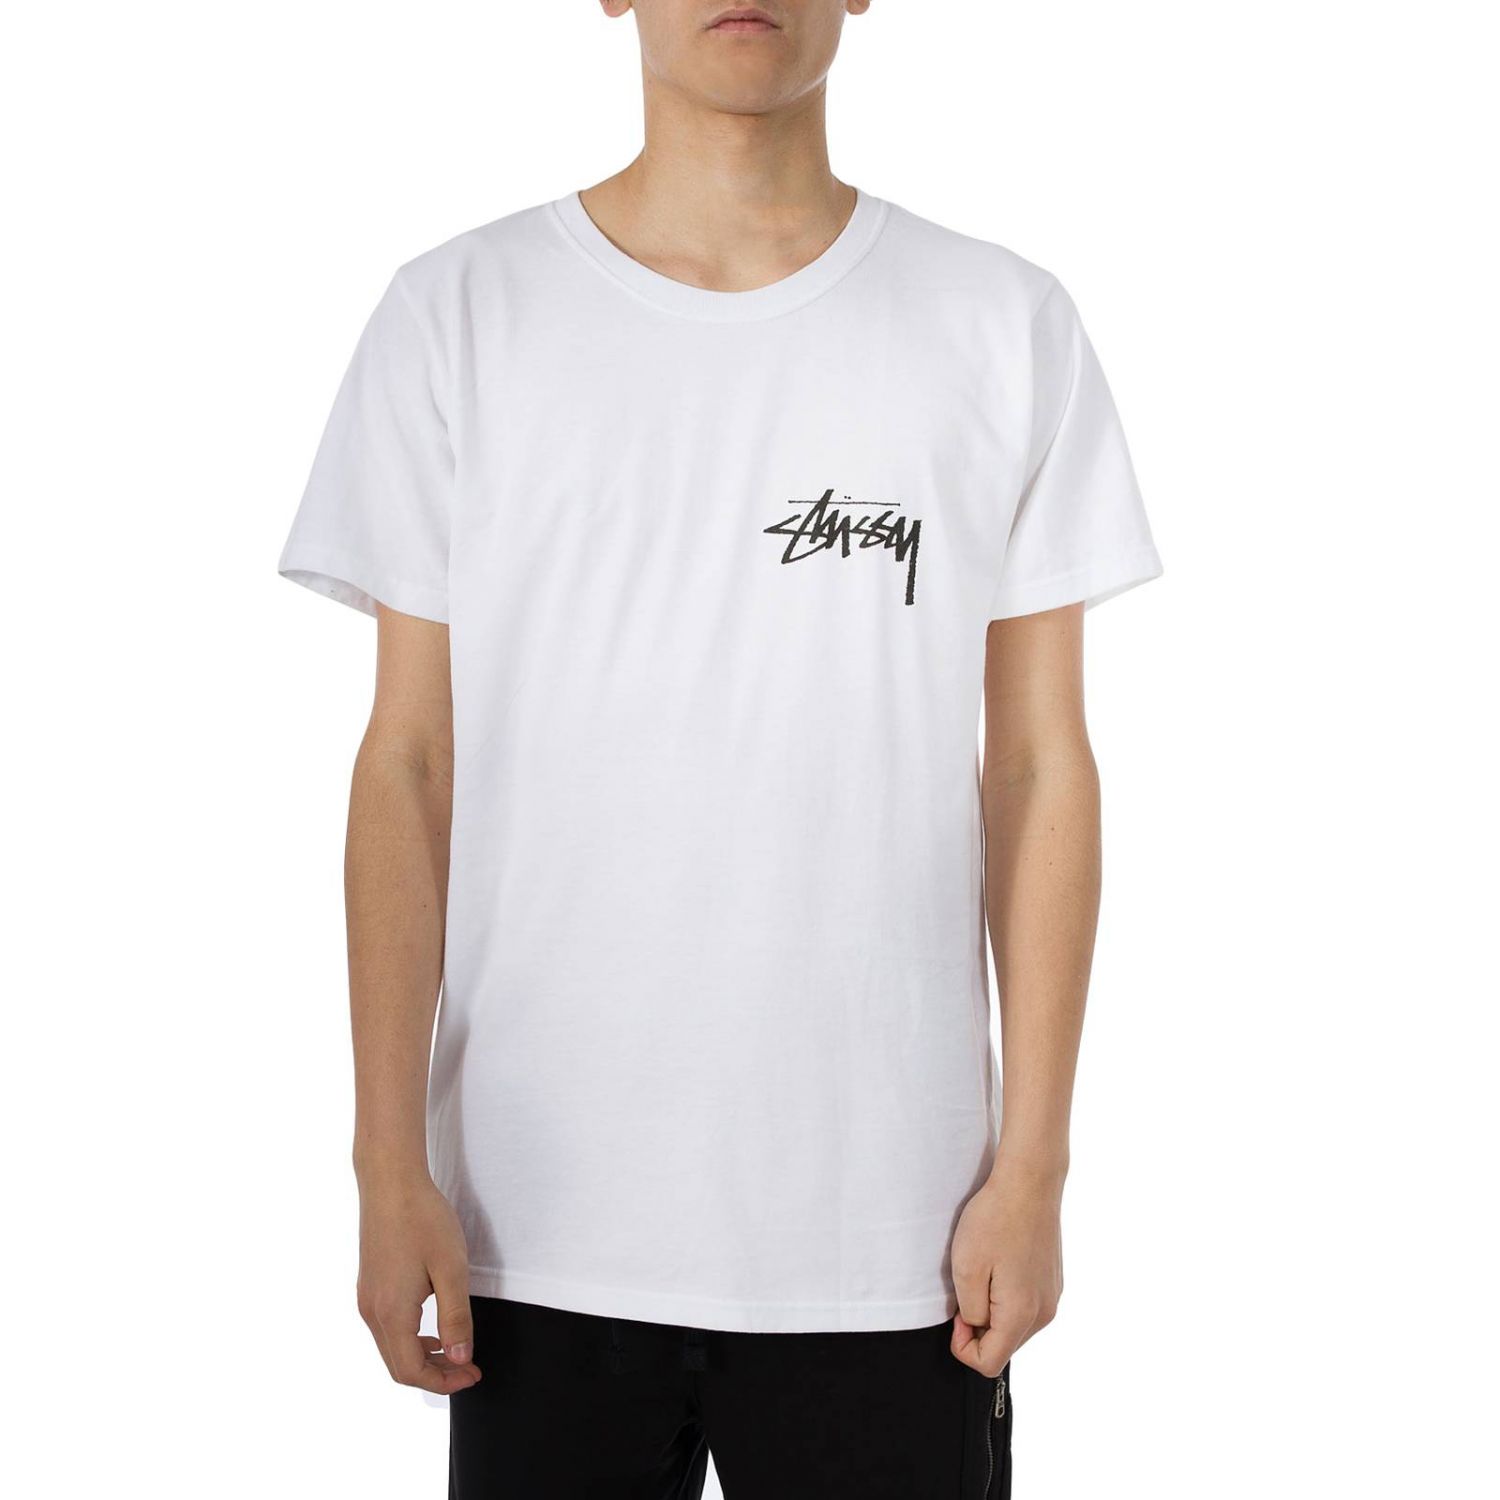 Stussy Outlet: T-shirt men - White | T-Shirt Stussy 1904340 GIGLIO.COM